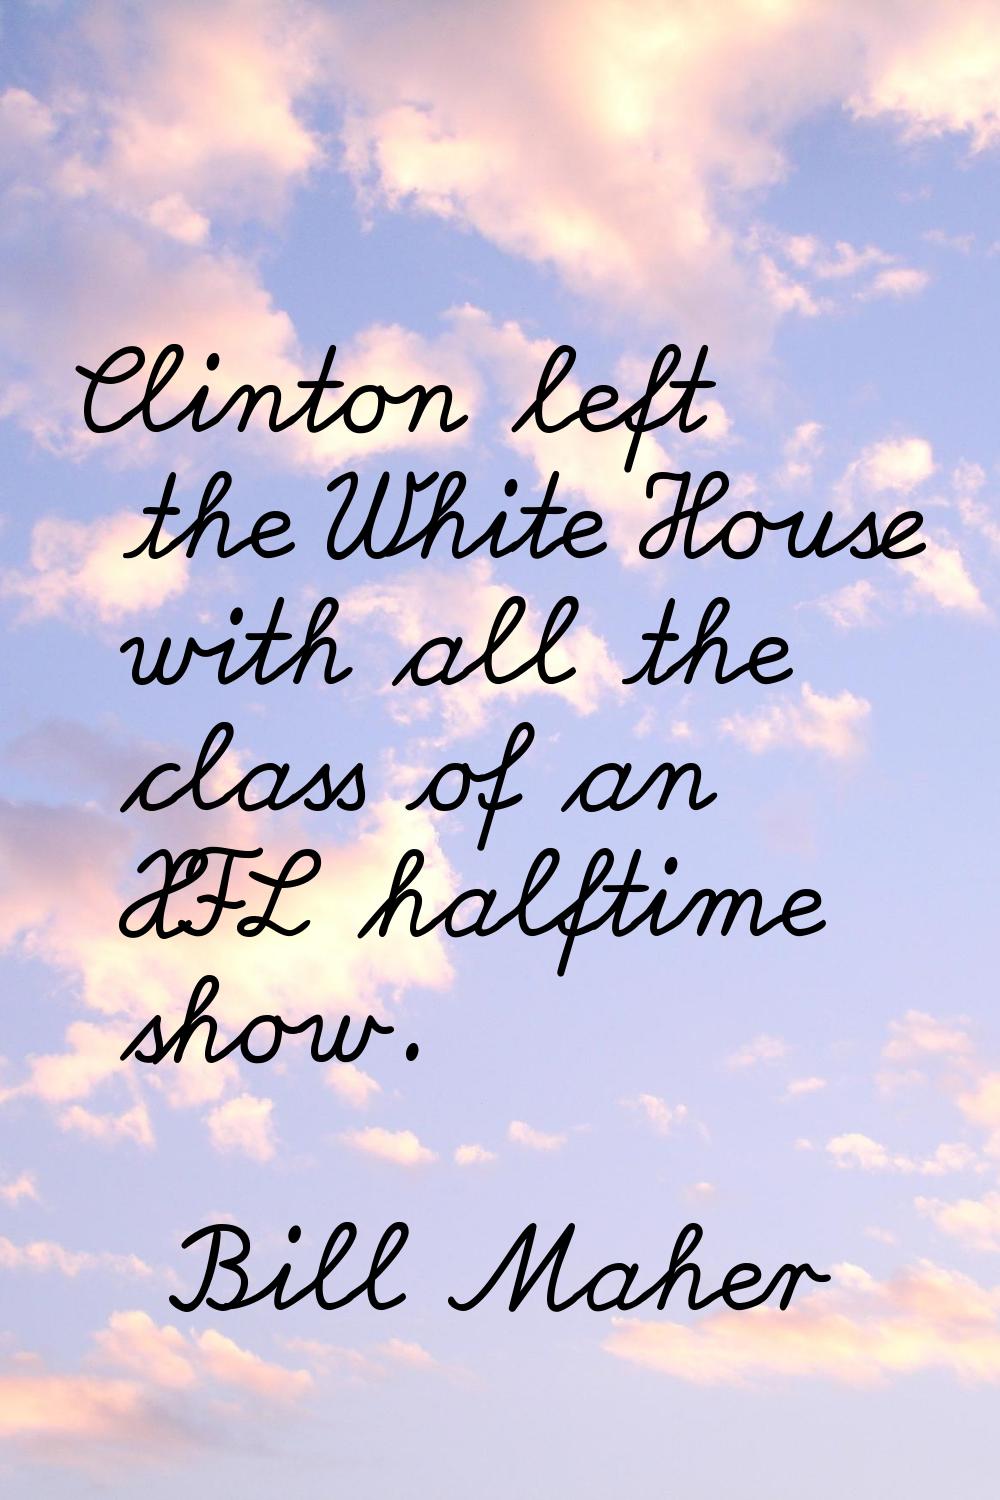 Clinton left the White House with all the class of an XFL halftime show.